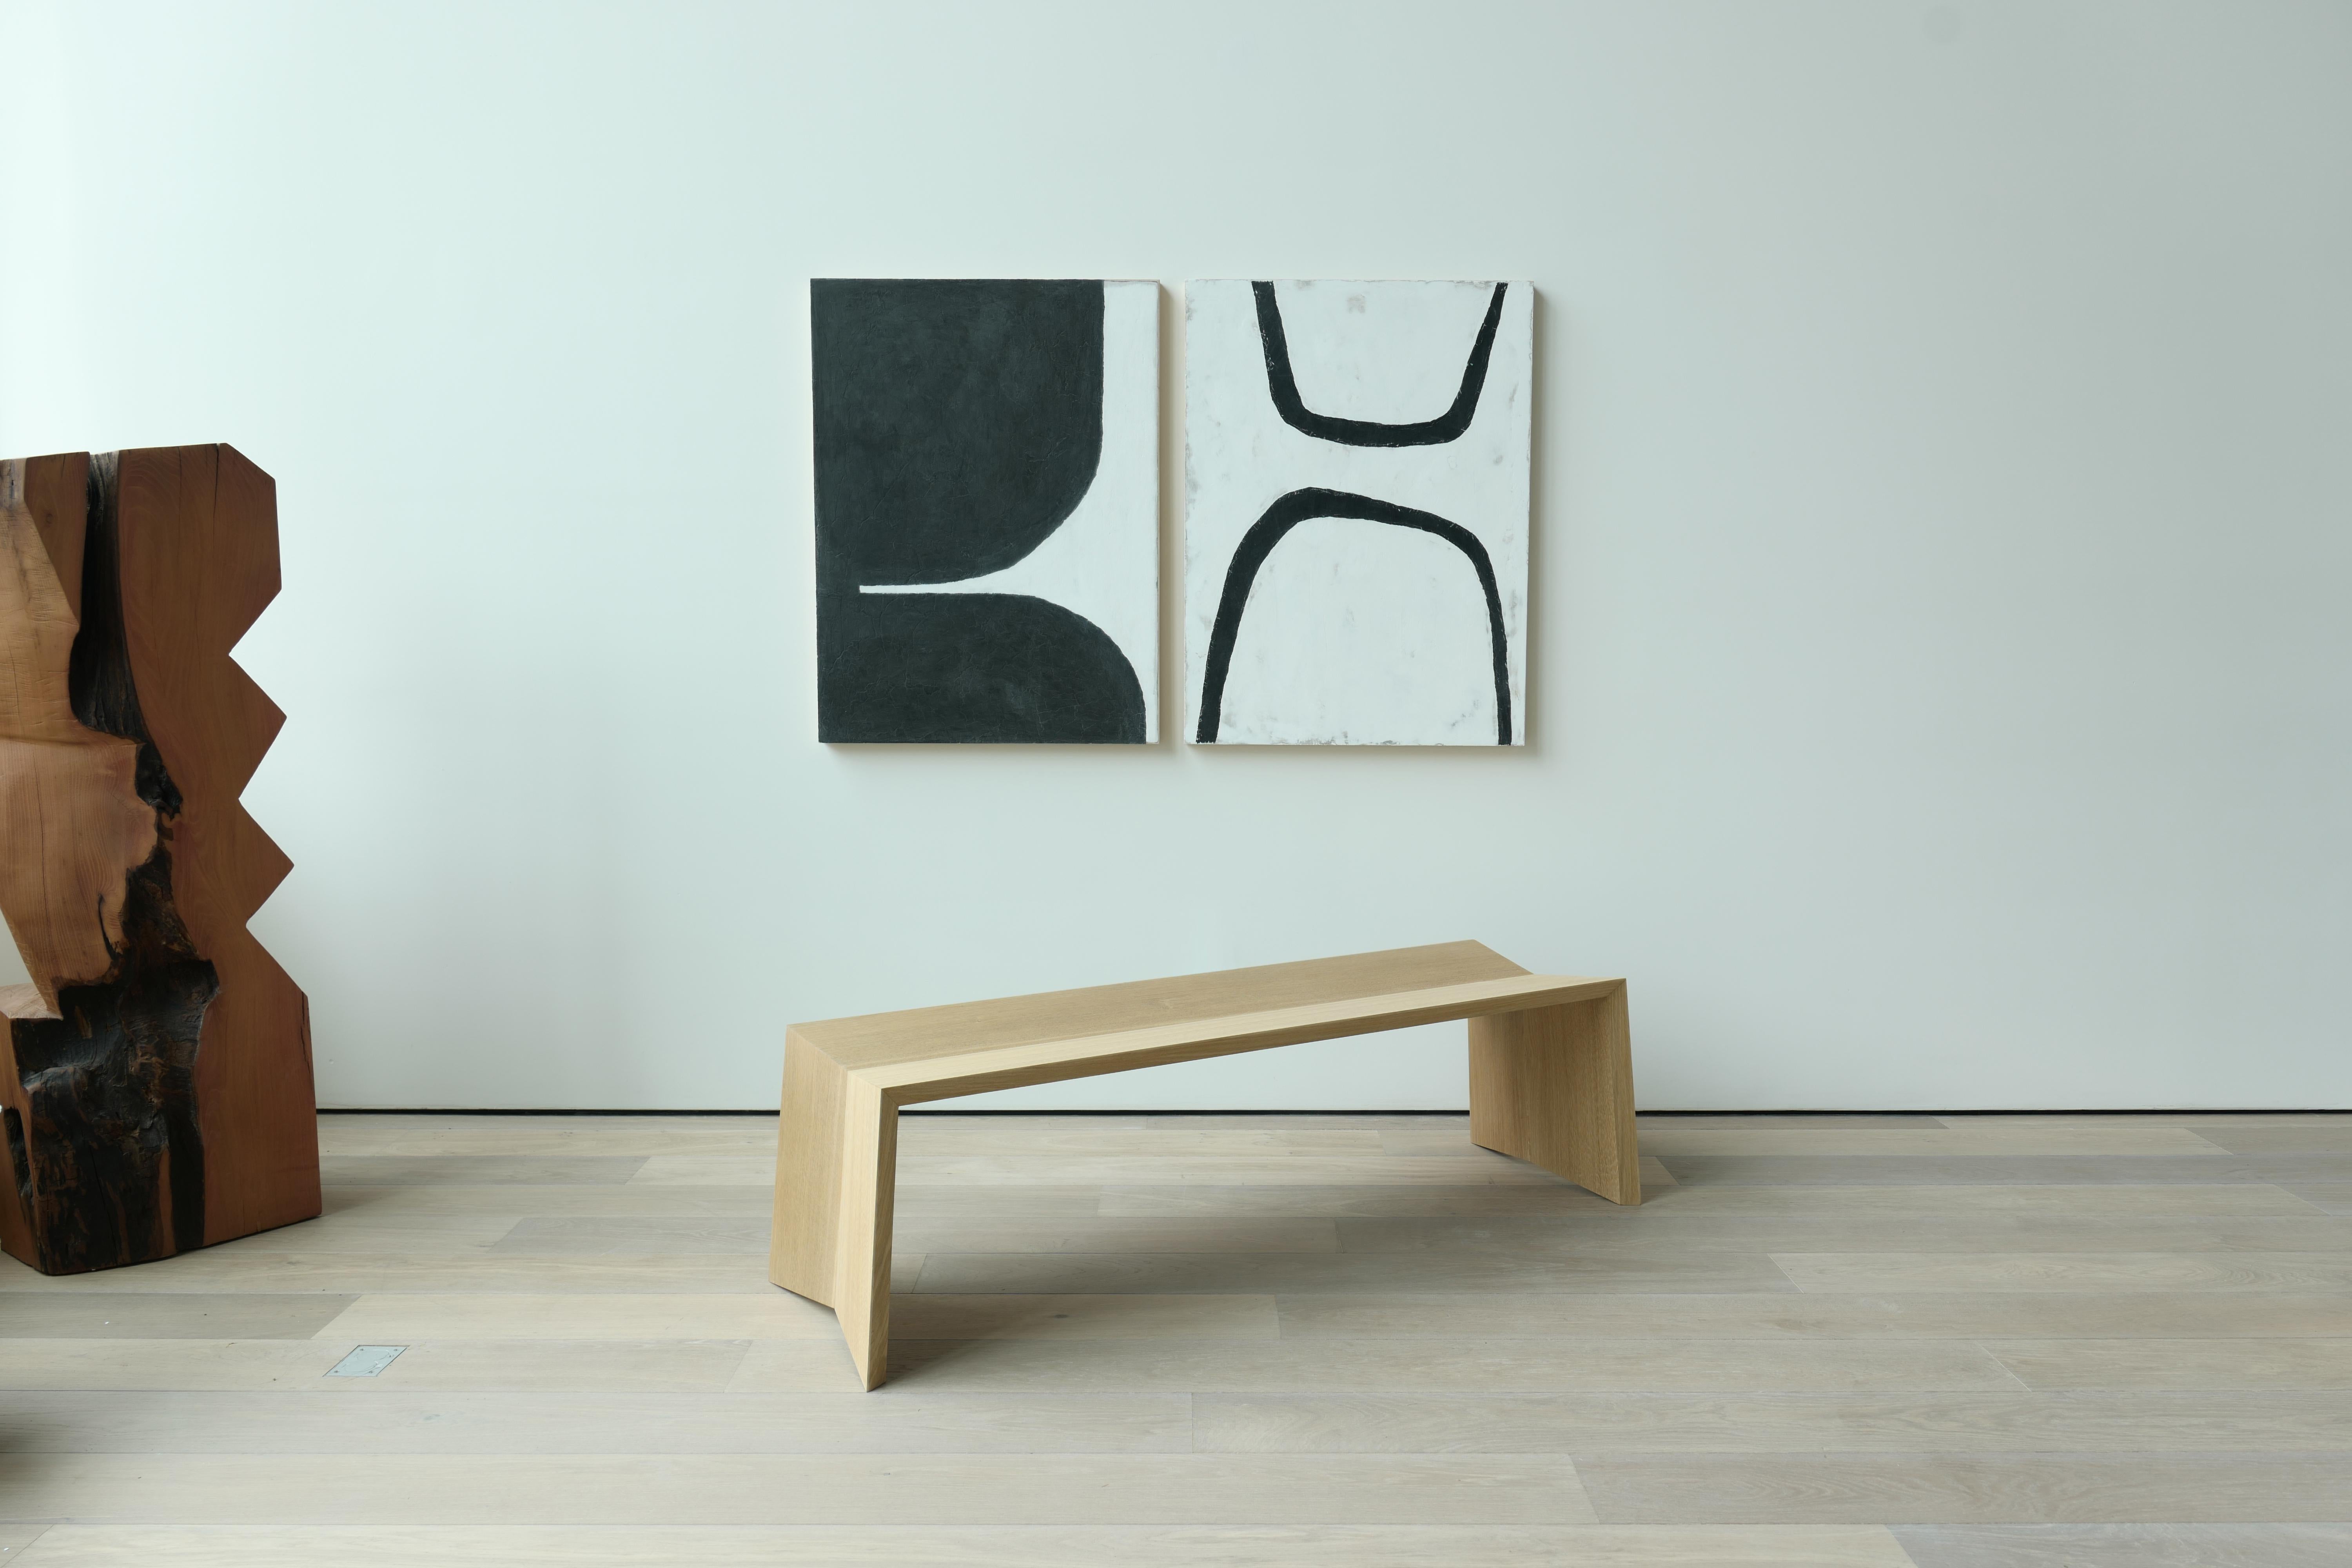 Muse bench by Jude Di Leo
Dimensions: 160 x 50 x 47 cm
Materials: Solid white oak
 
Muse was designed with Bear & Lion partner Bernardo Guillermo in 2008. Intended as a museum bench, Muse is constructed in a continuous V-shape that supplies both